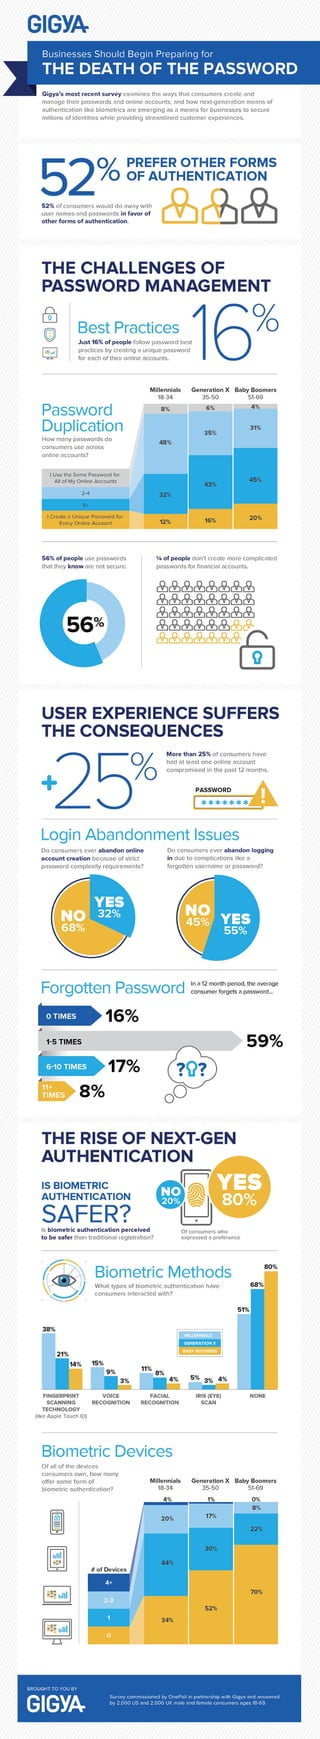 Gigya Infographic - Death Of A Password